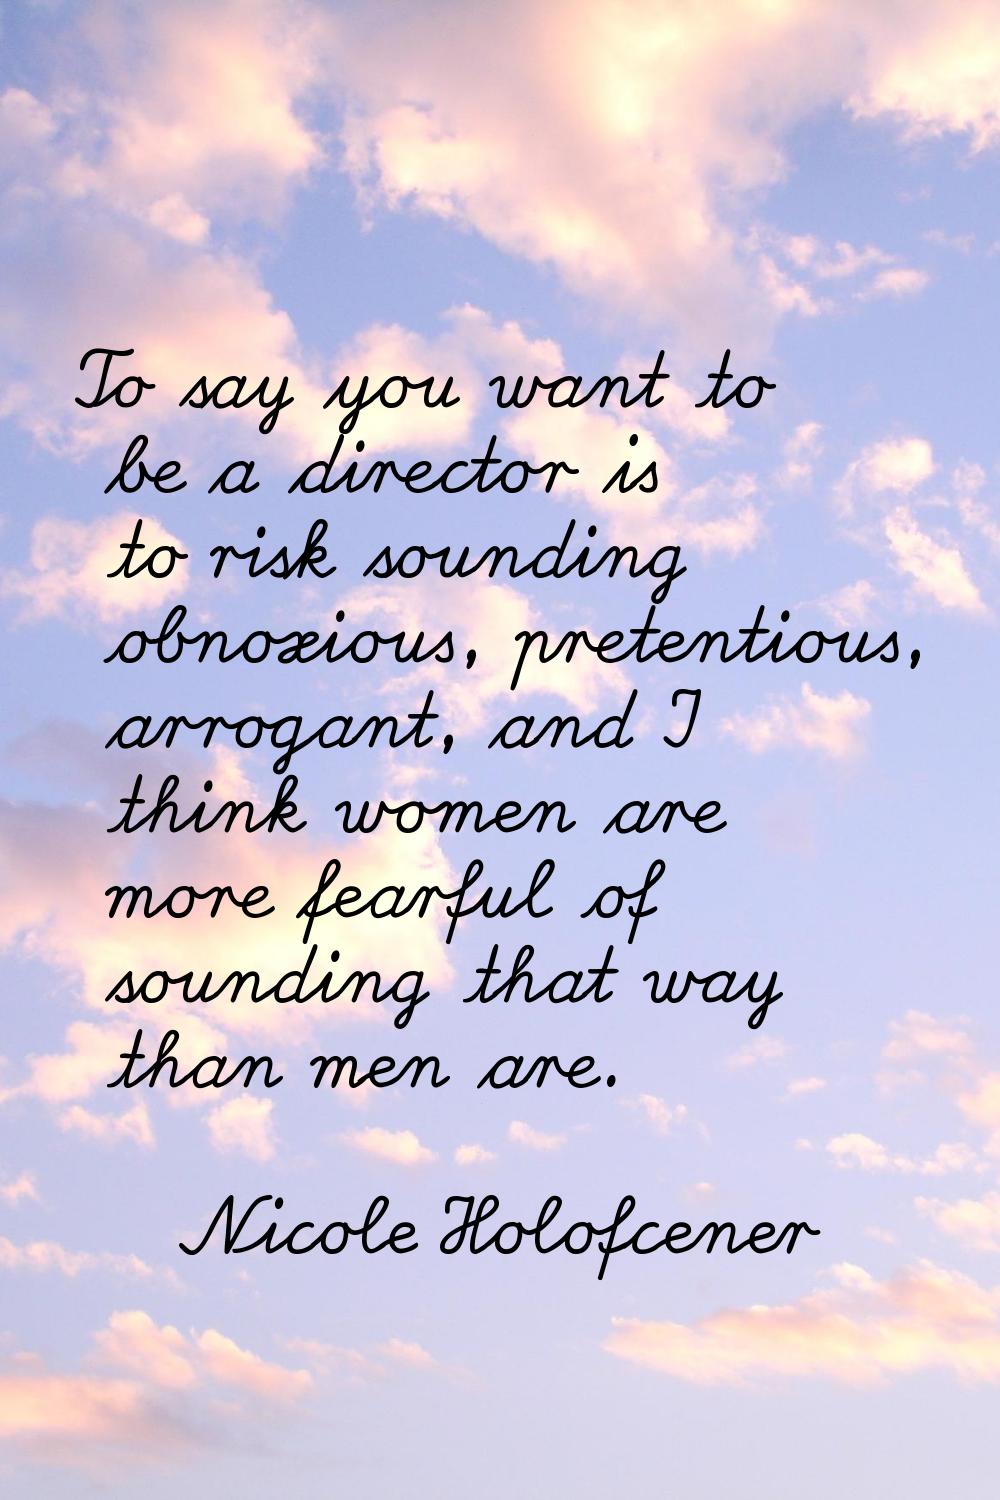 To say you want to be a director is to risk sounding obnoxious, pretentious, arrogant, and I think 